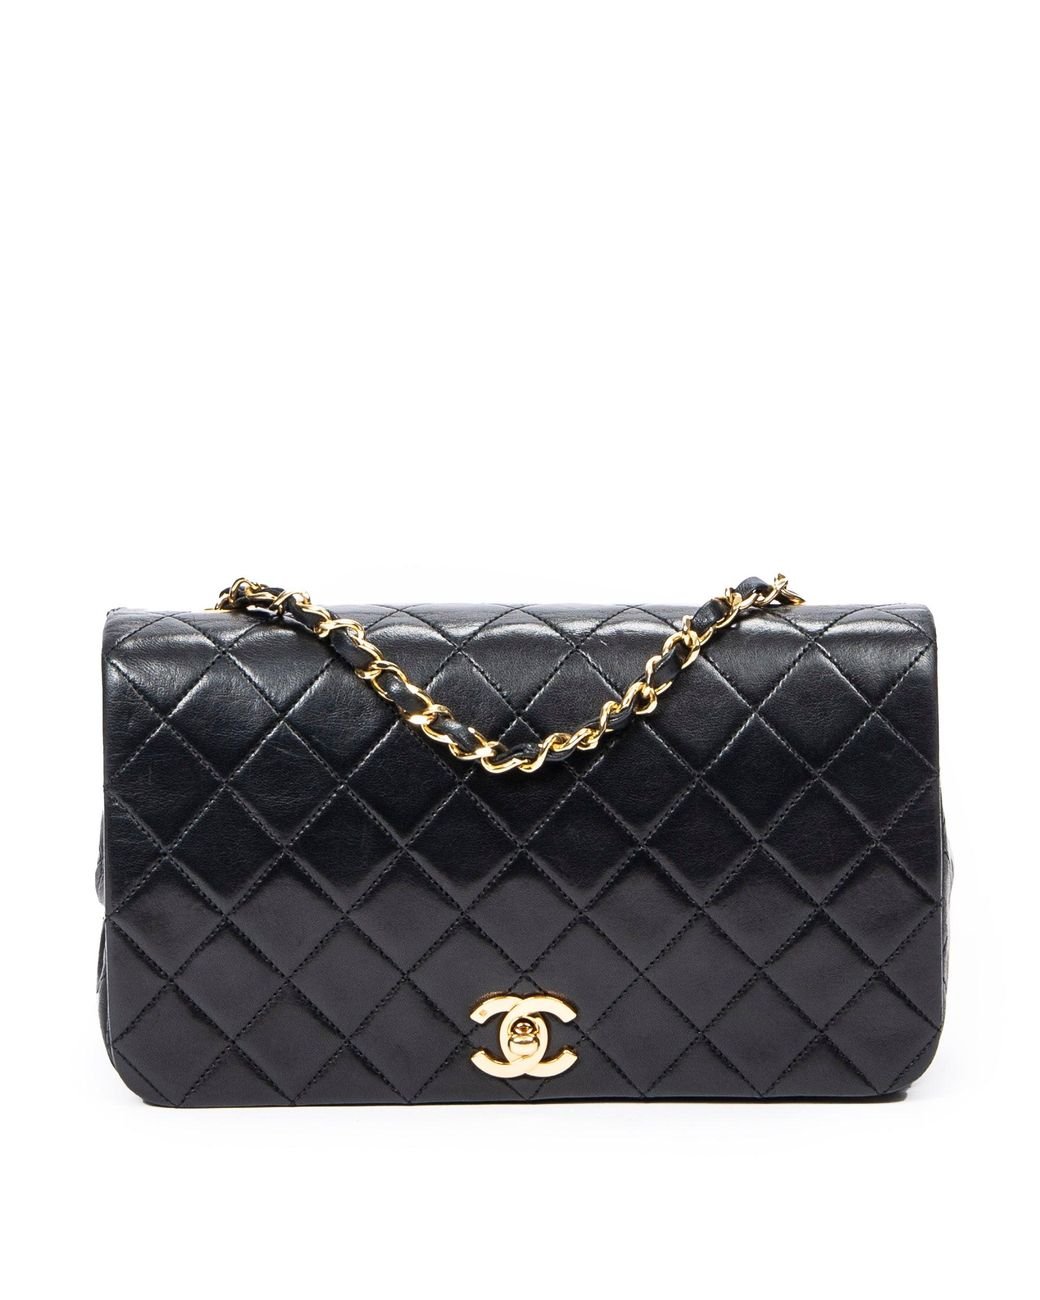 Chanel Mademoiselle Bag in Blue